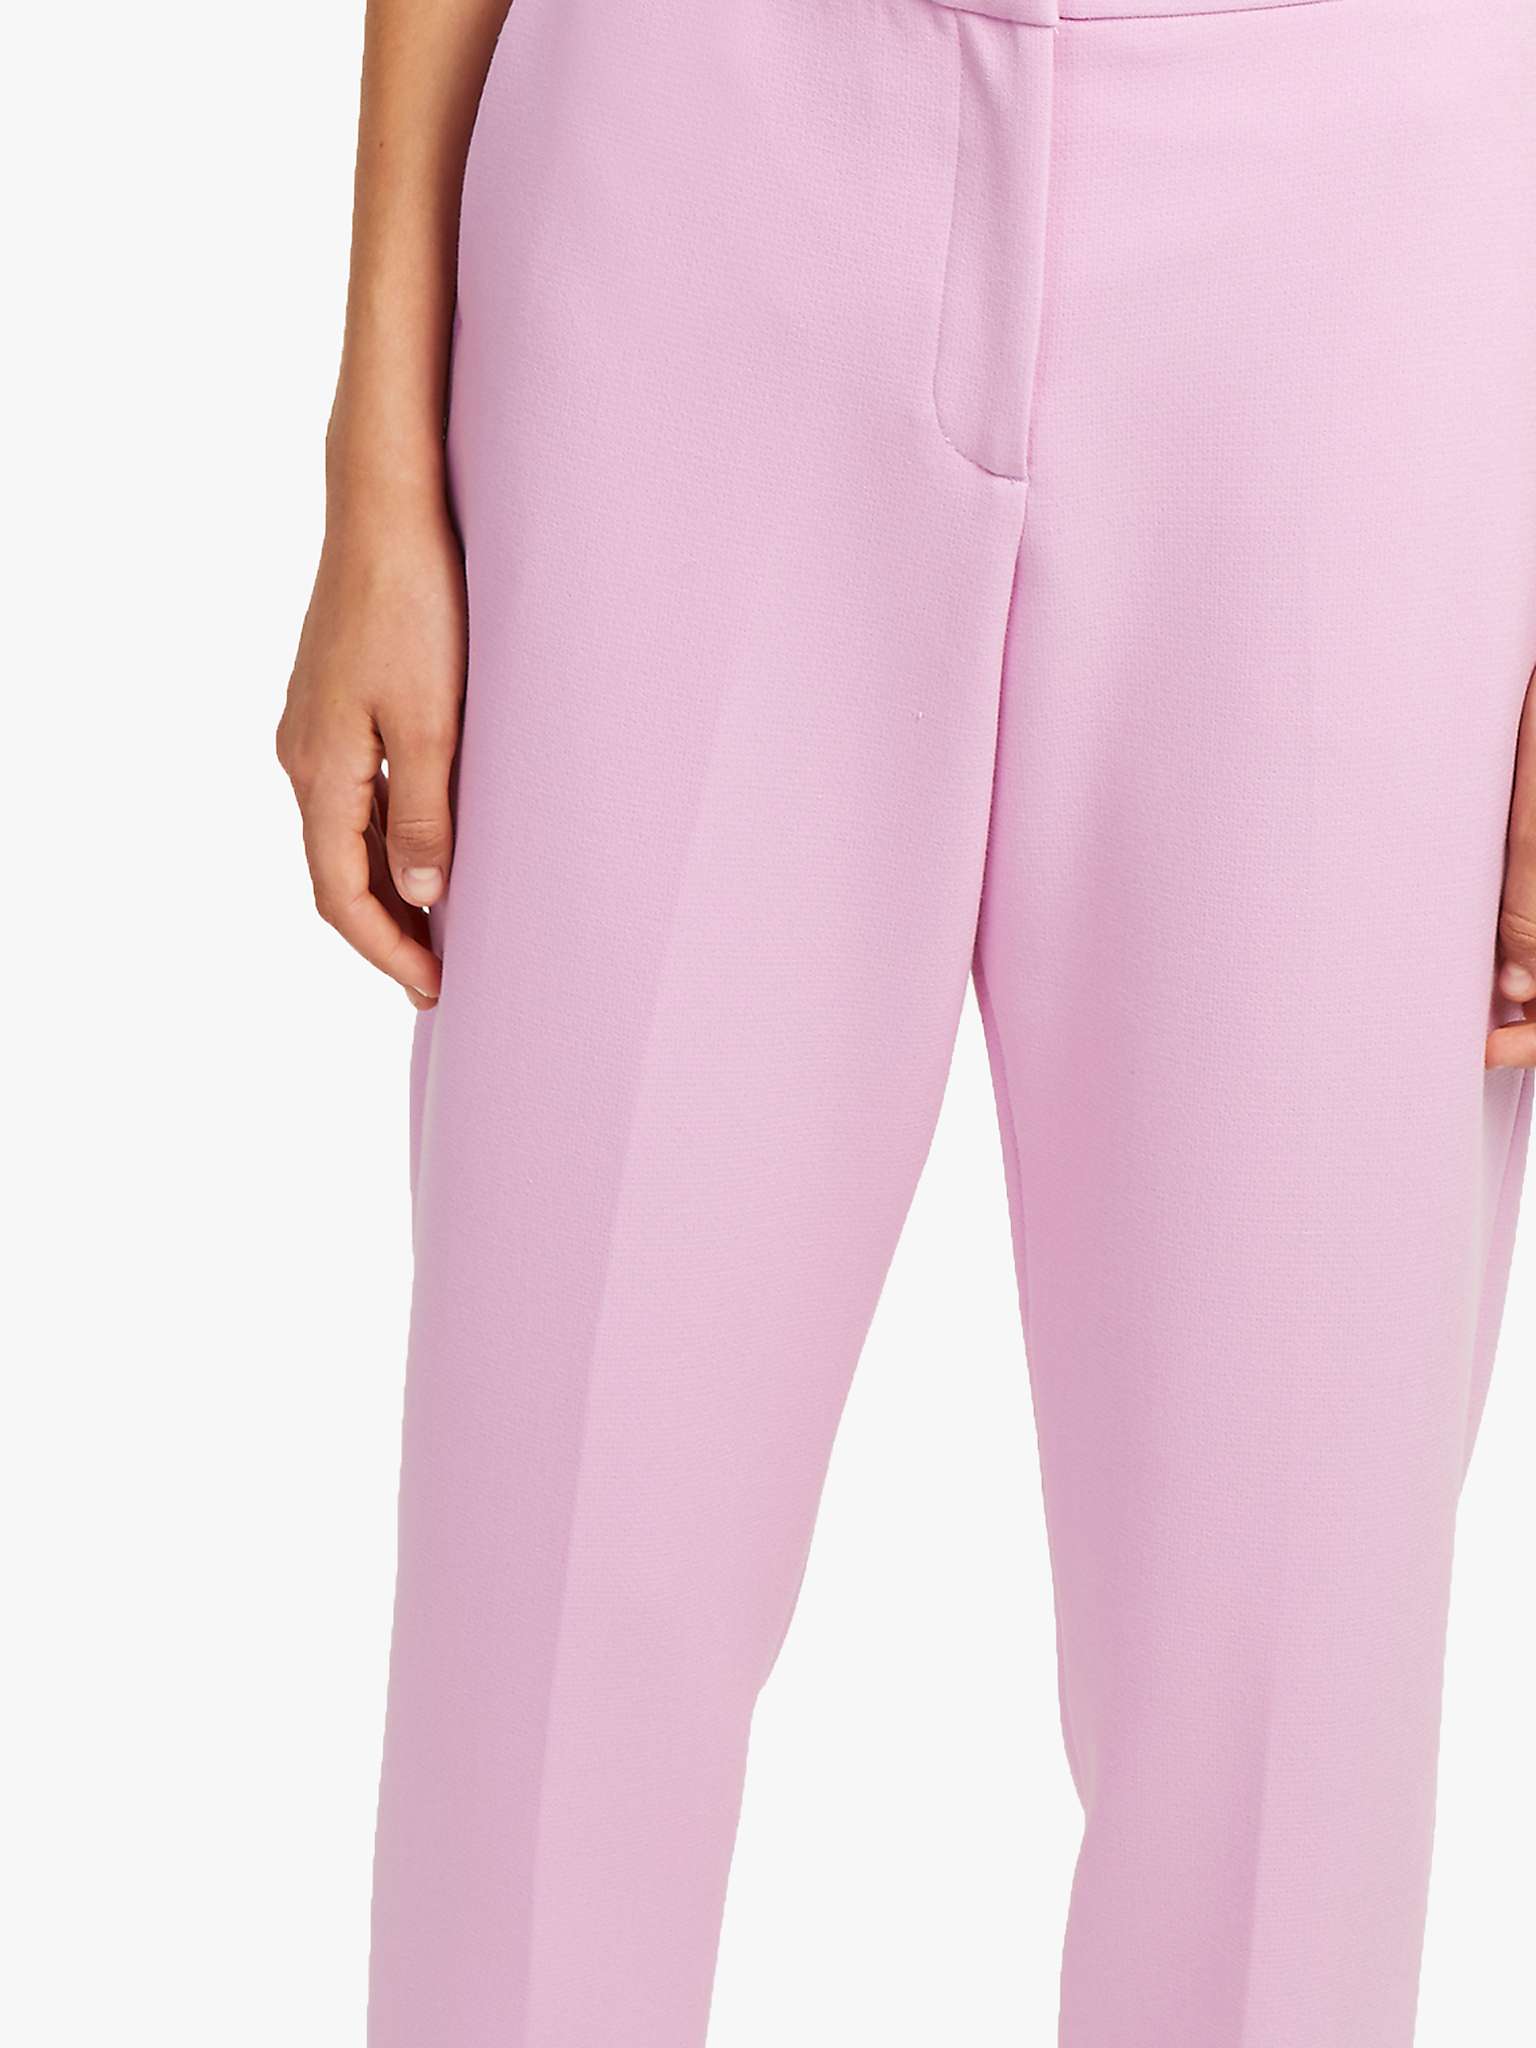 Buy French Connection Sundae Tailored Trousers, Kyoto Blossom Online at johnlewis.com